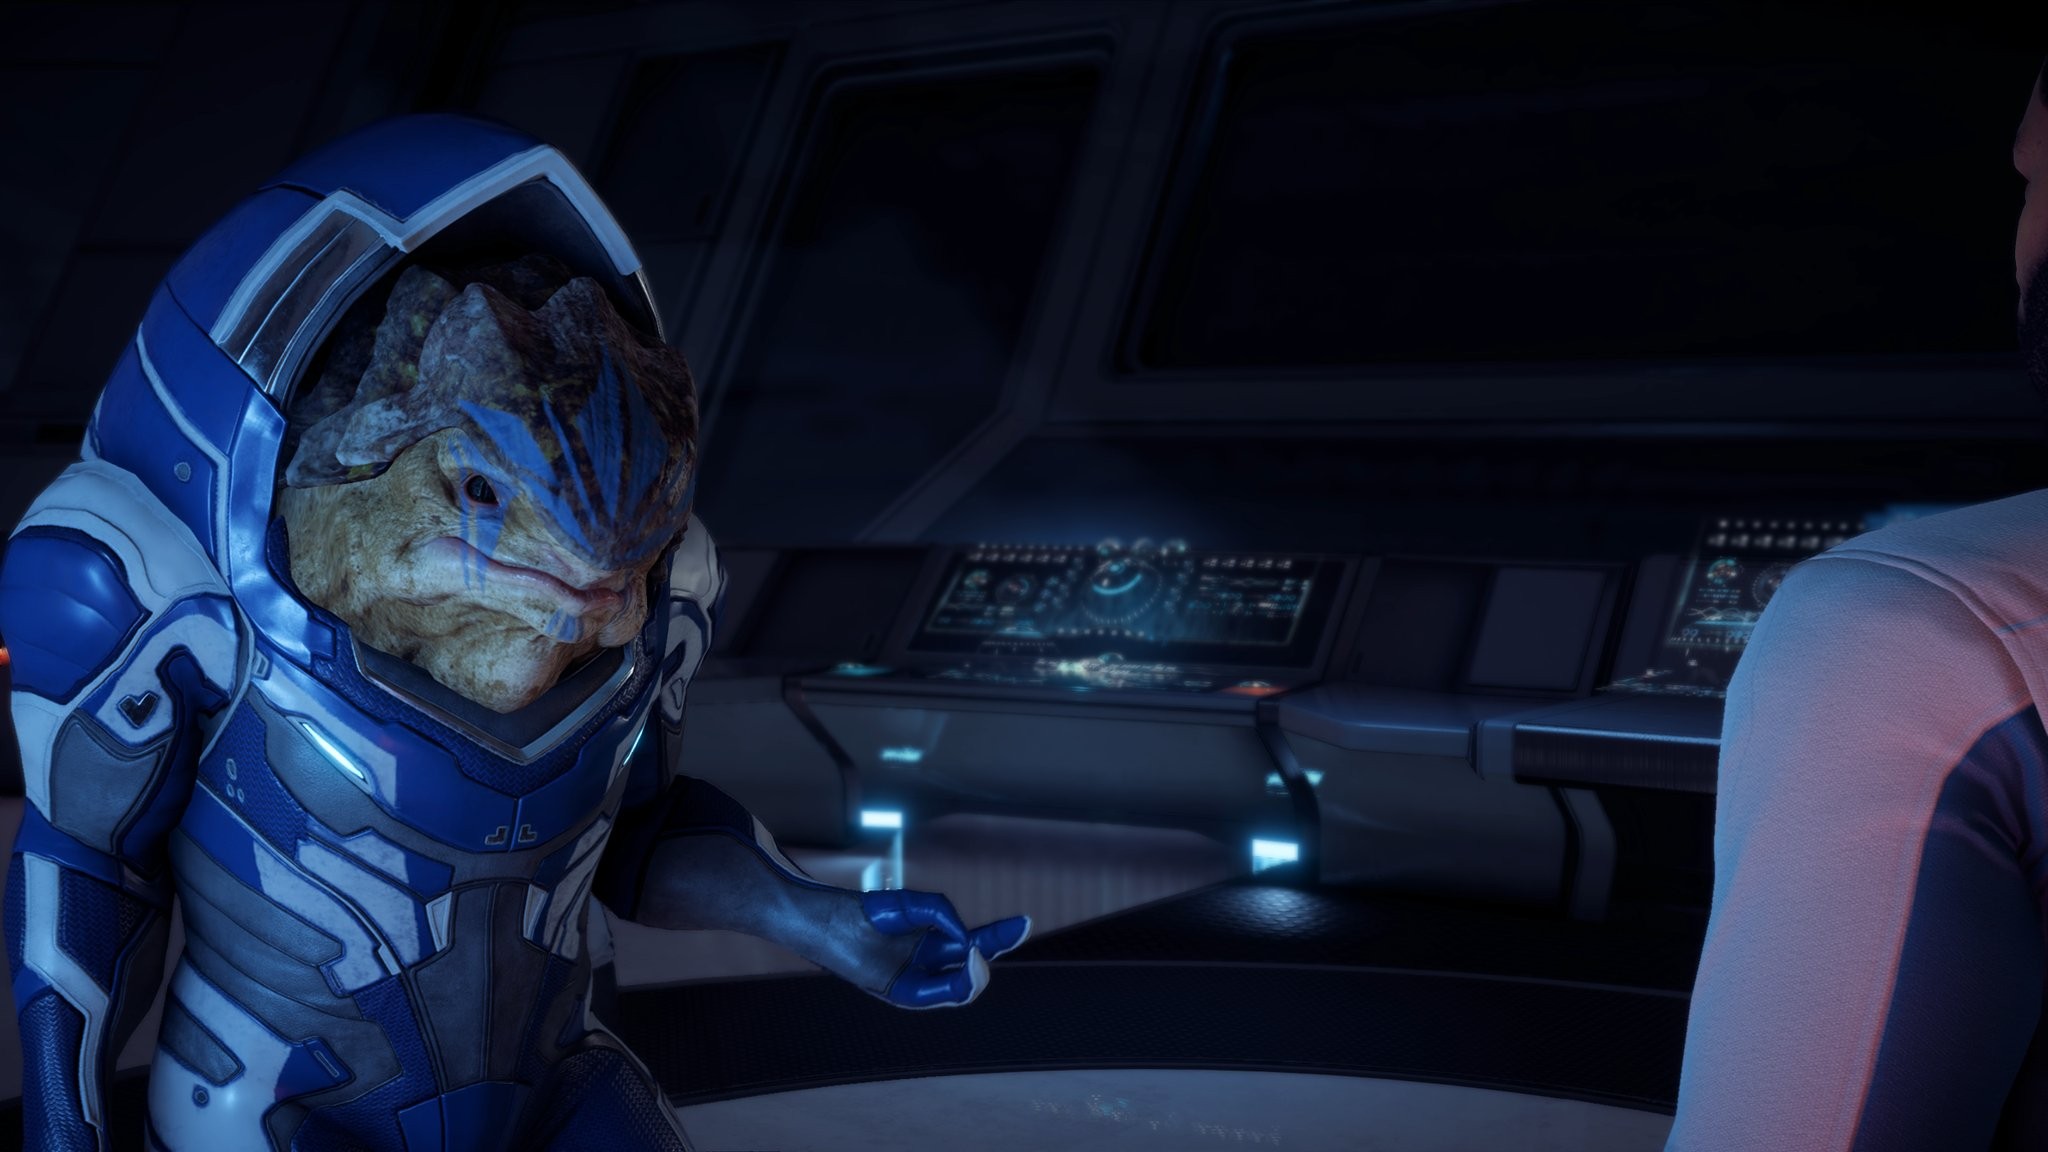 Mass effect andromeda русский. Mass Effect: Andromeda. Mass Effect Andromeda 1. Mass Effect Andromeda Xbox one. Накмор кеш масс эффект.